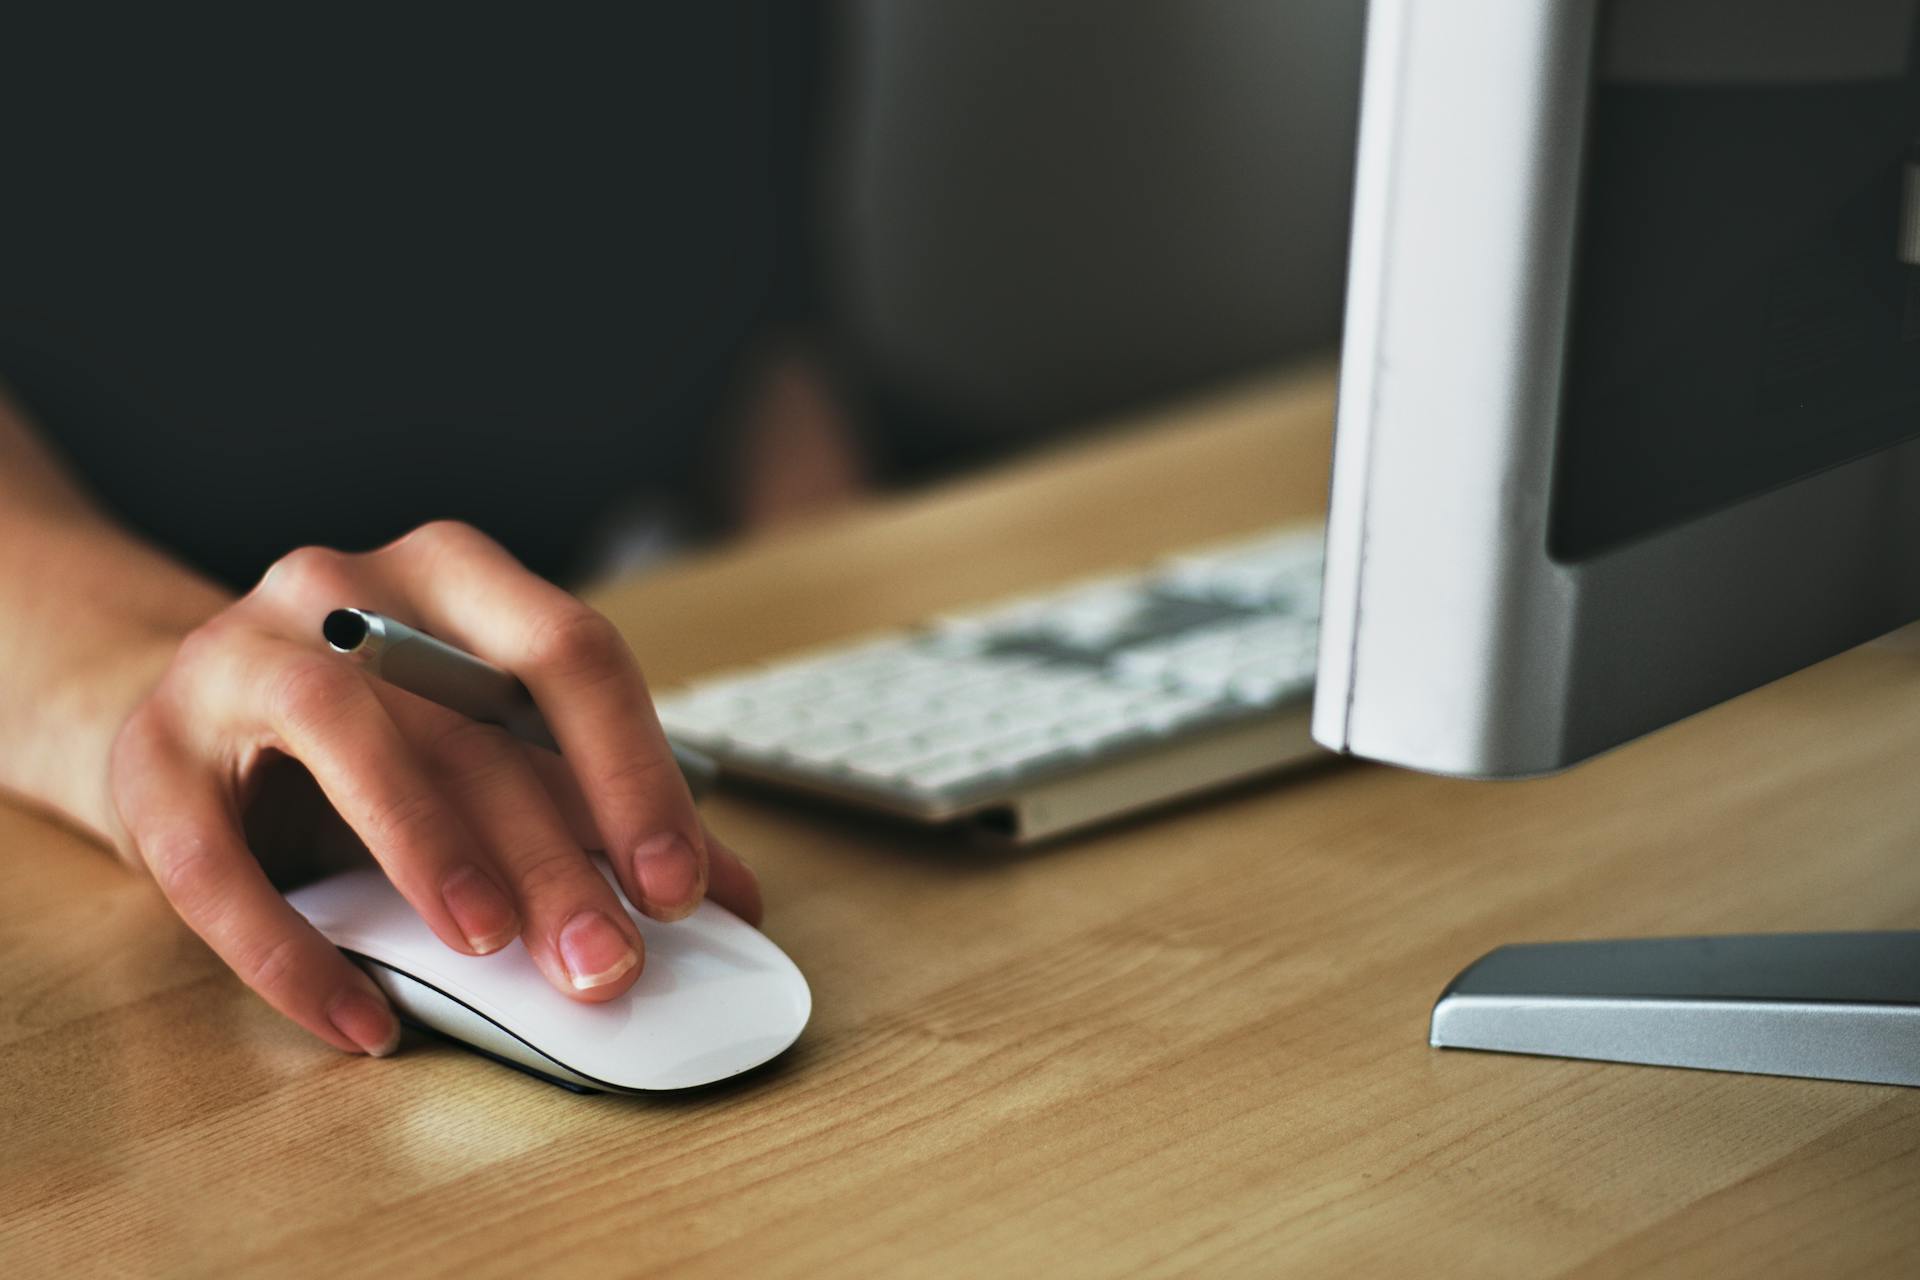 A person using a computer mouse | Source: Pexels